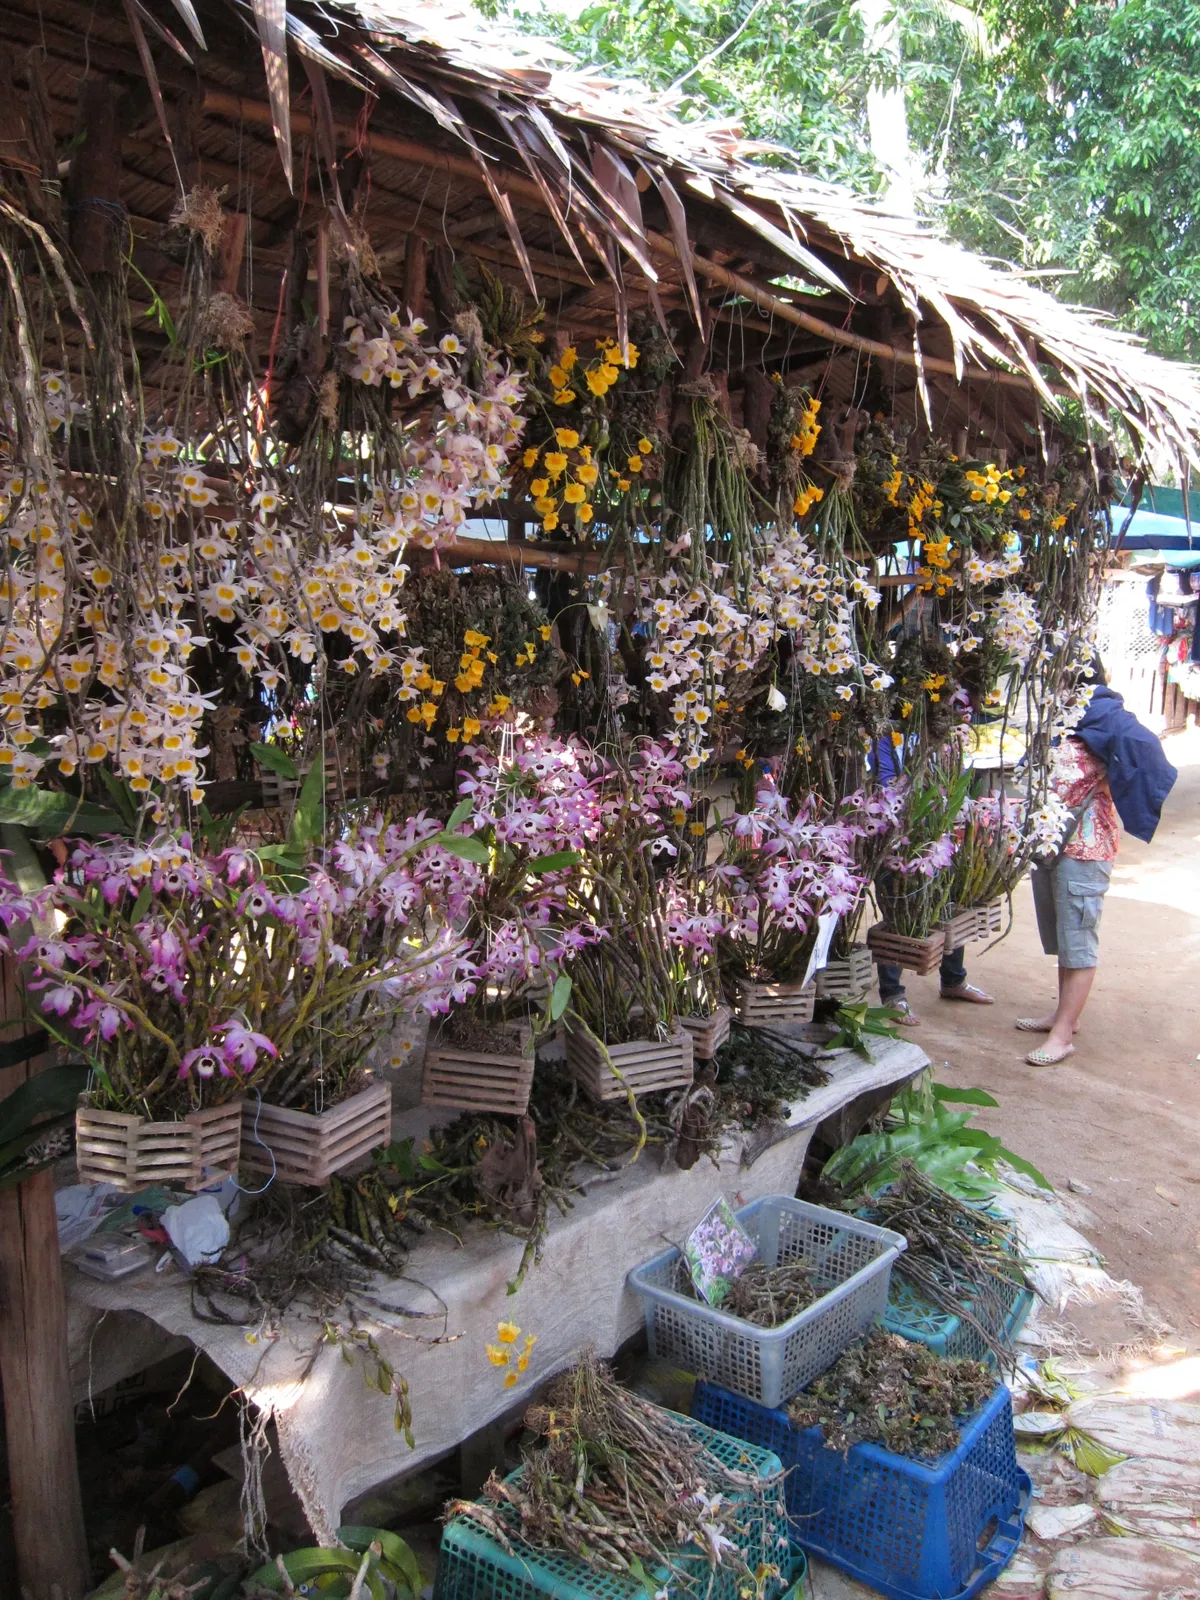 Hundreds of wild-collected, protected ornamental orchids for sale in a public market at the Thailand-Myanmar border. © Jacob Phelps